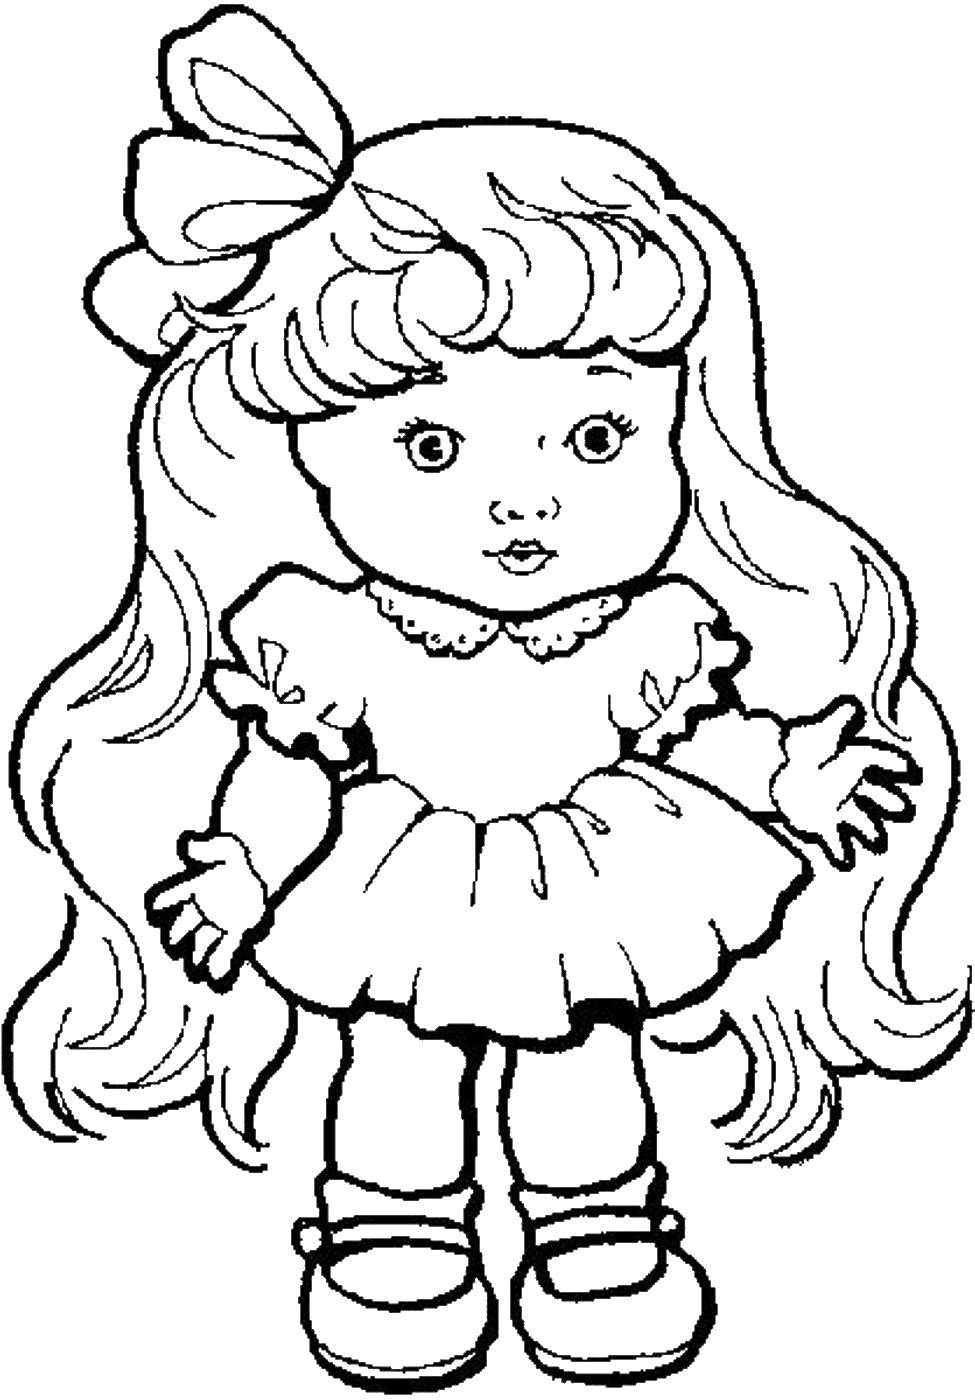 Coloring Beautiful doll with bow. Category Dolls. Tags:  Doll, fashionista, fashion.